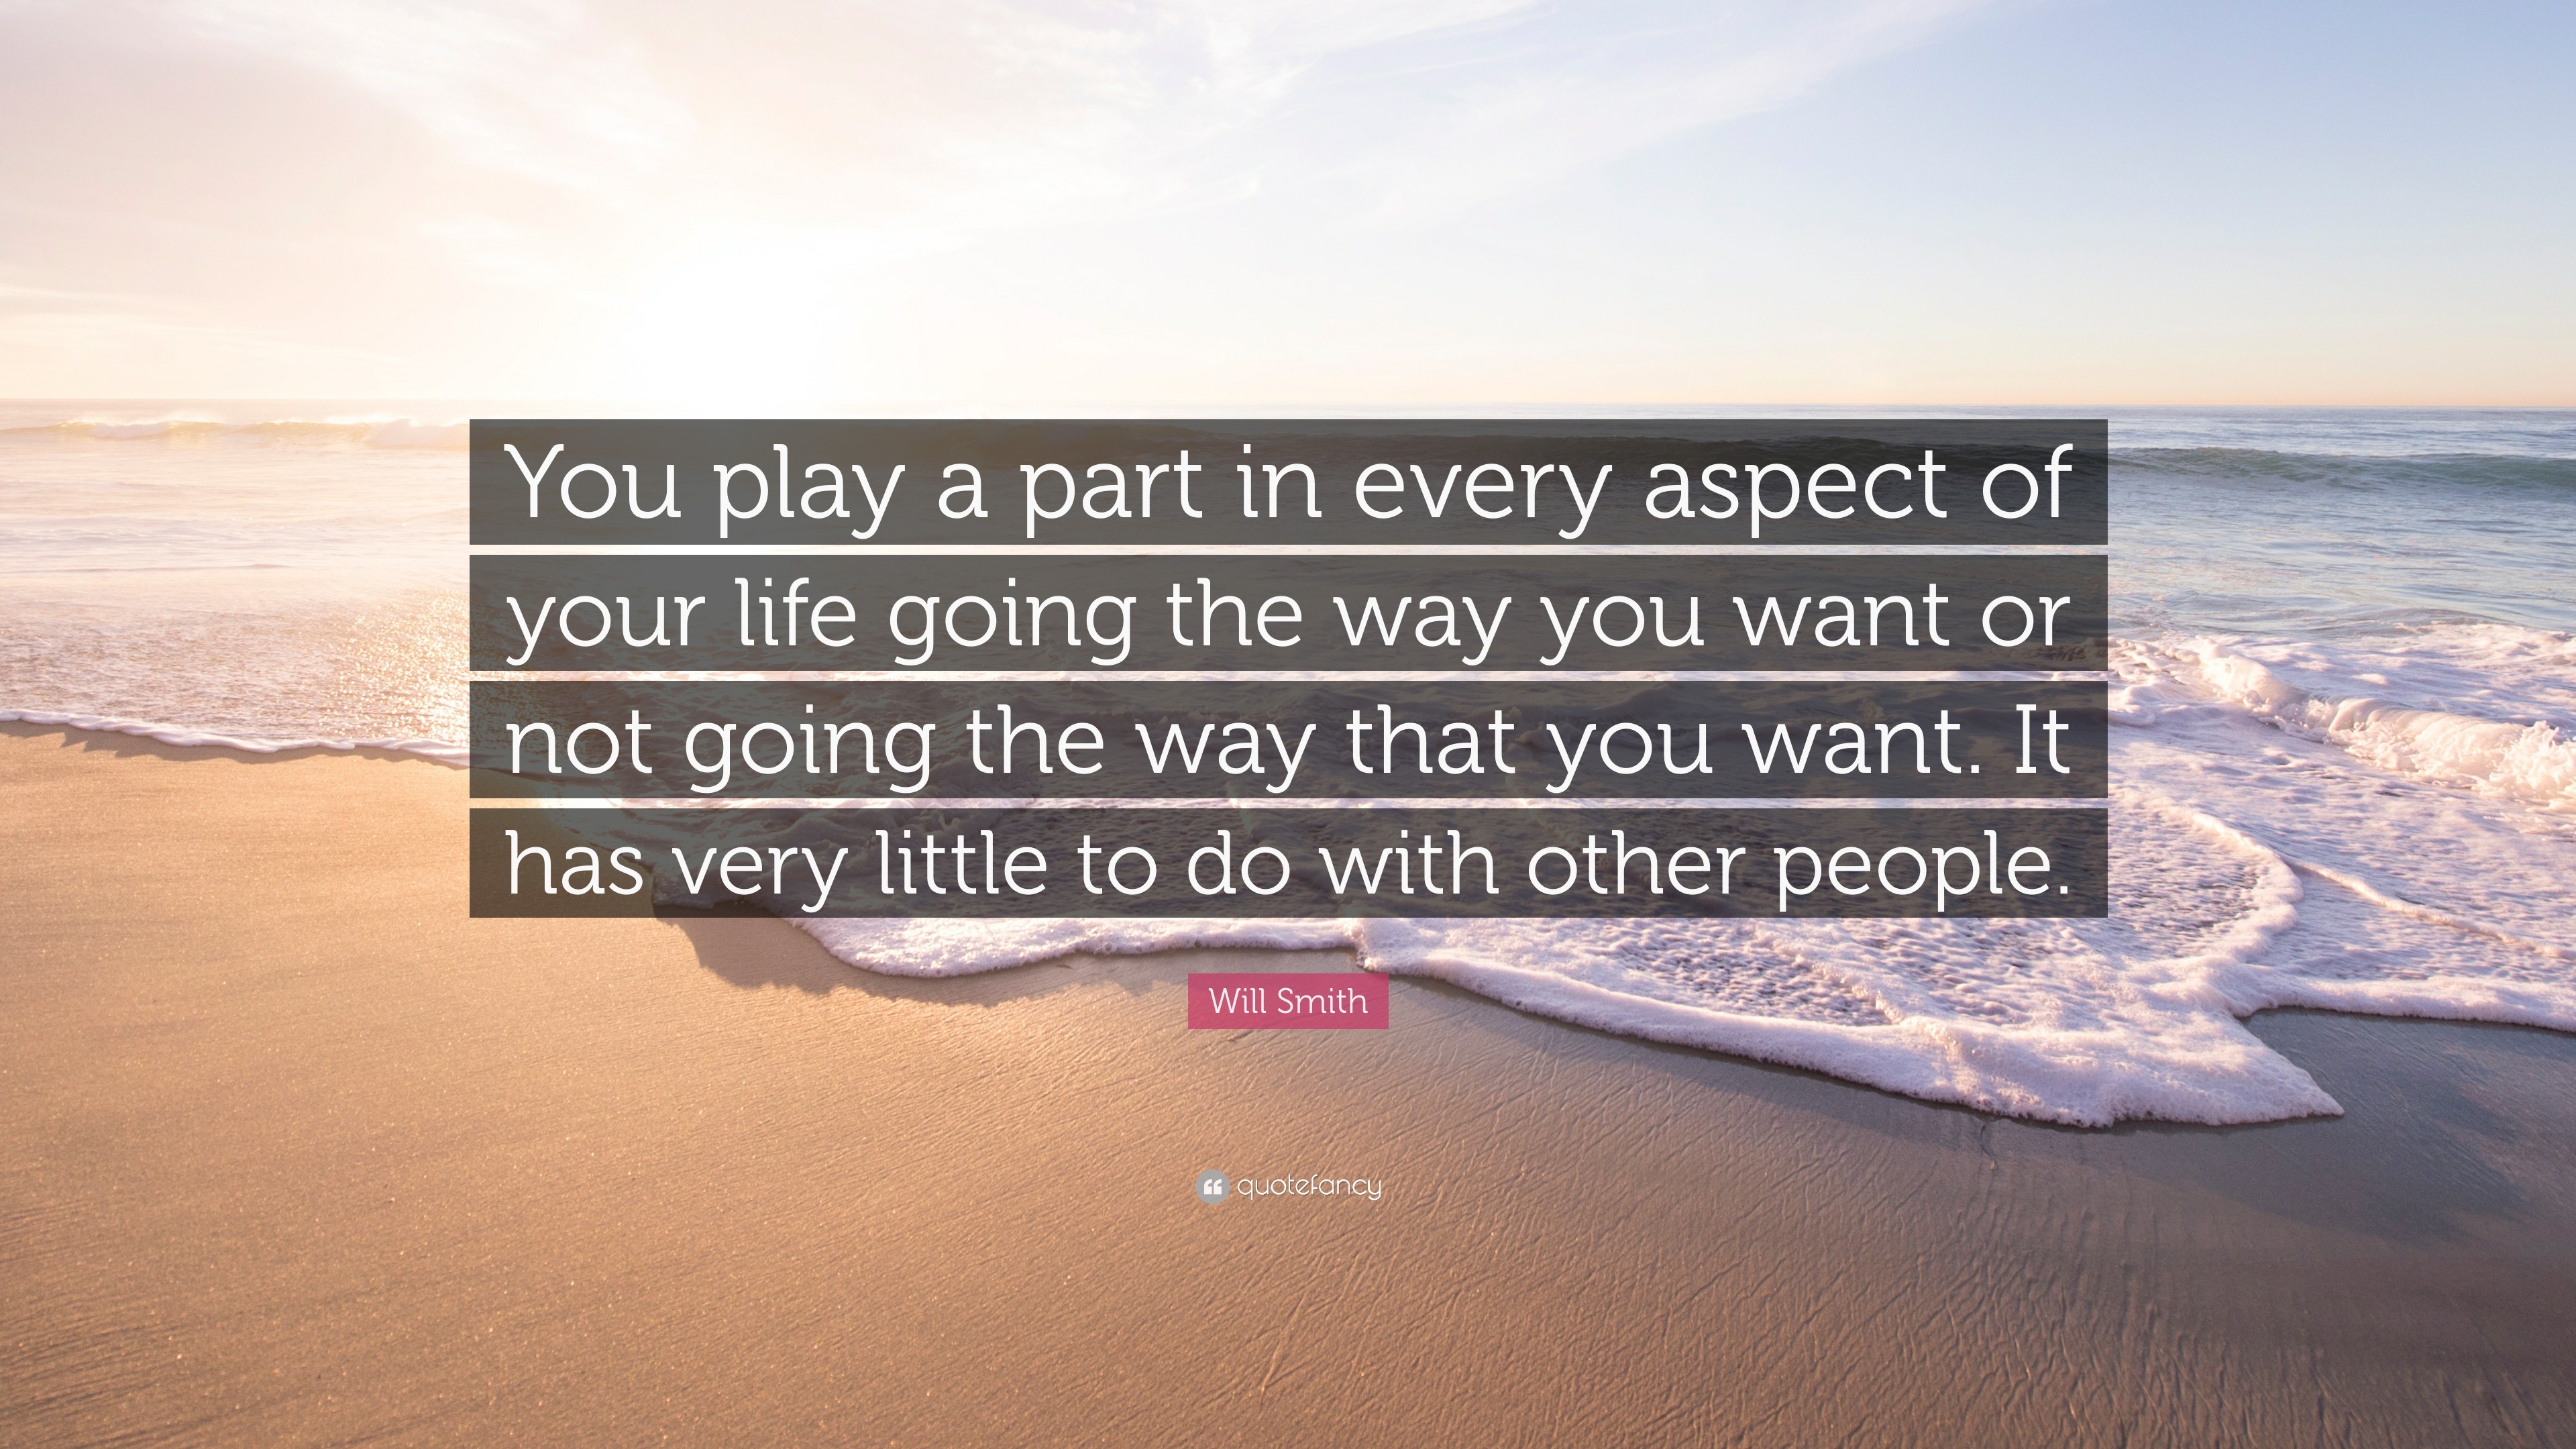 Will Smith Quote “You play a part in every aspect of your life going